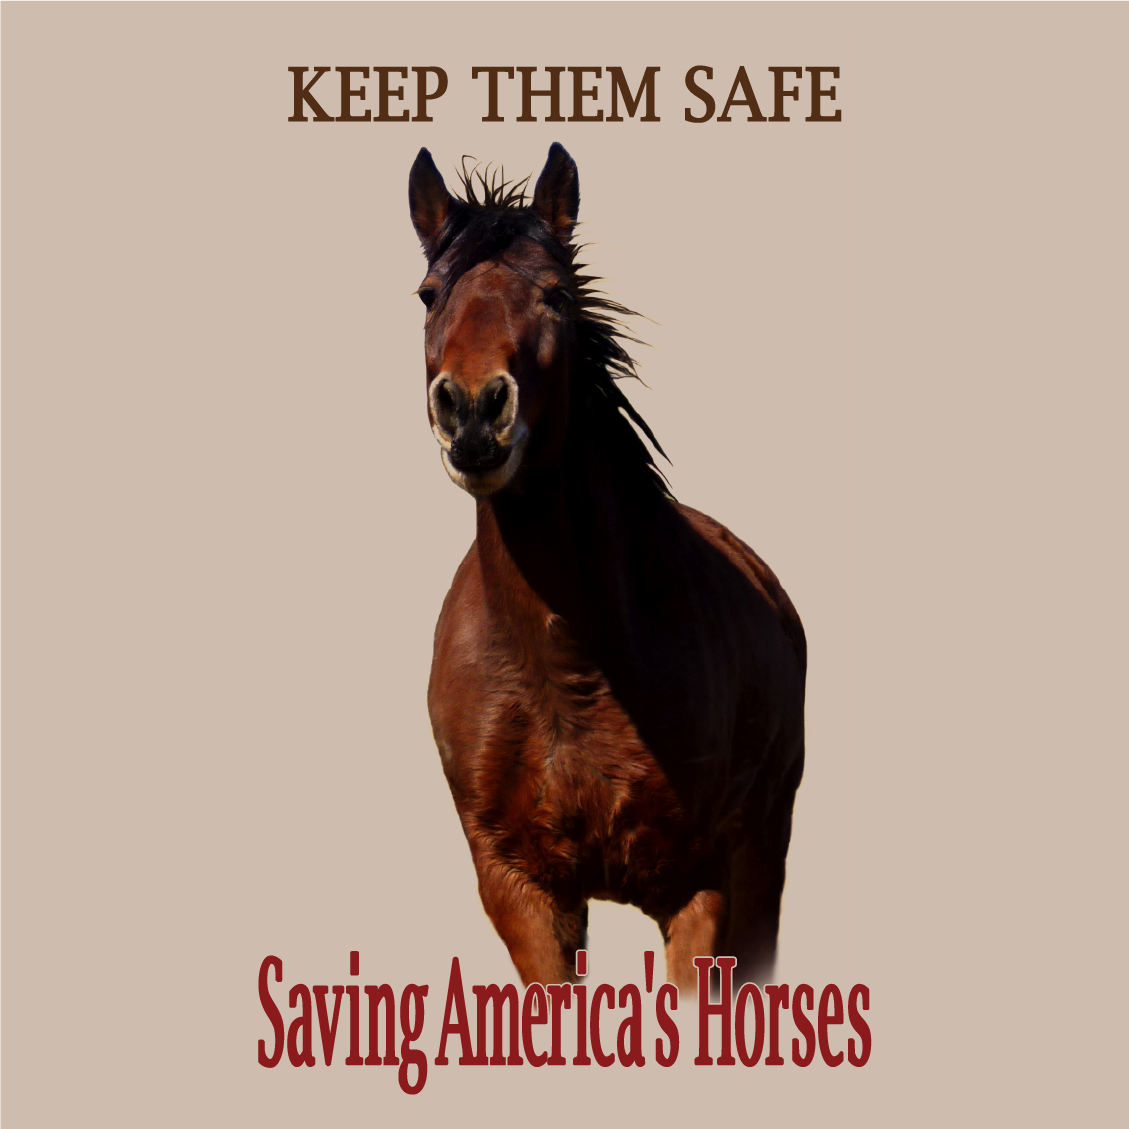 Saving America's Horses - Tees for Horses - Keep Them Safe shirt design - zoomed